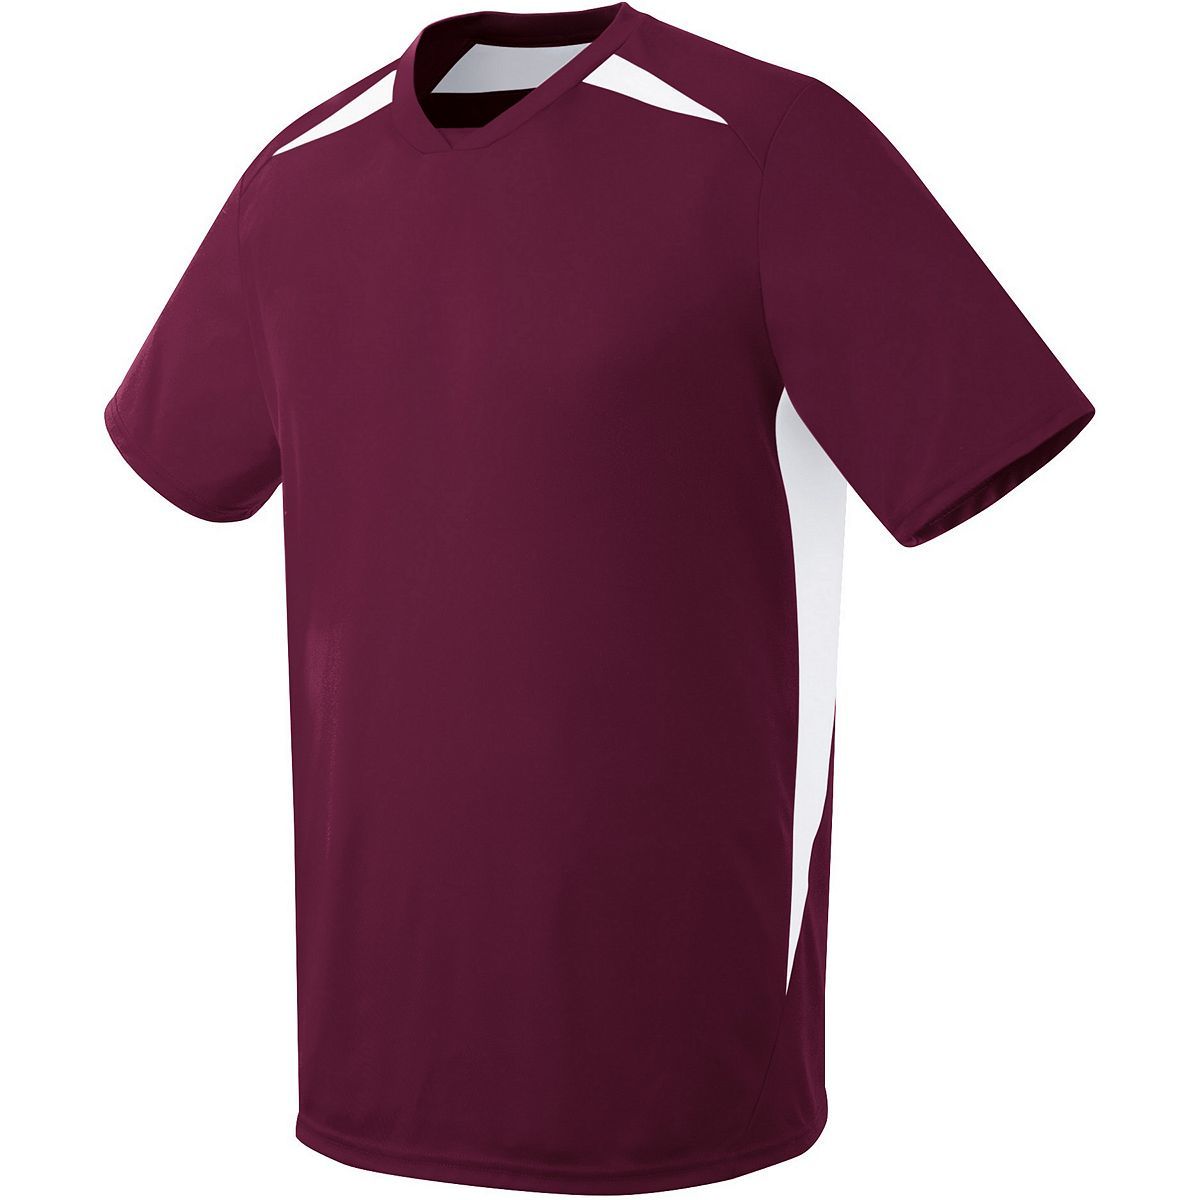 High 5 Adult Hawk Jersey in Maroon/White  -Part of the Adult, Adult-Jersey, High5-Products, Soccer, Shirts, All-Sports-1 product lines at KanaleyCreations.com